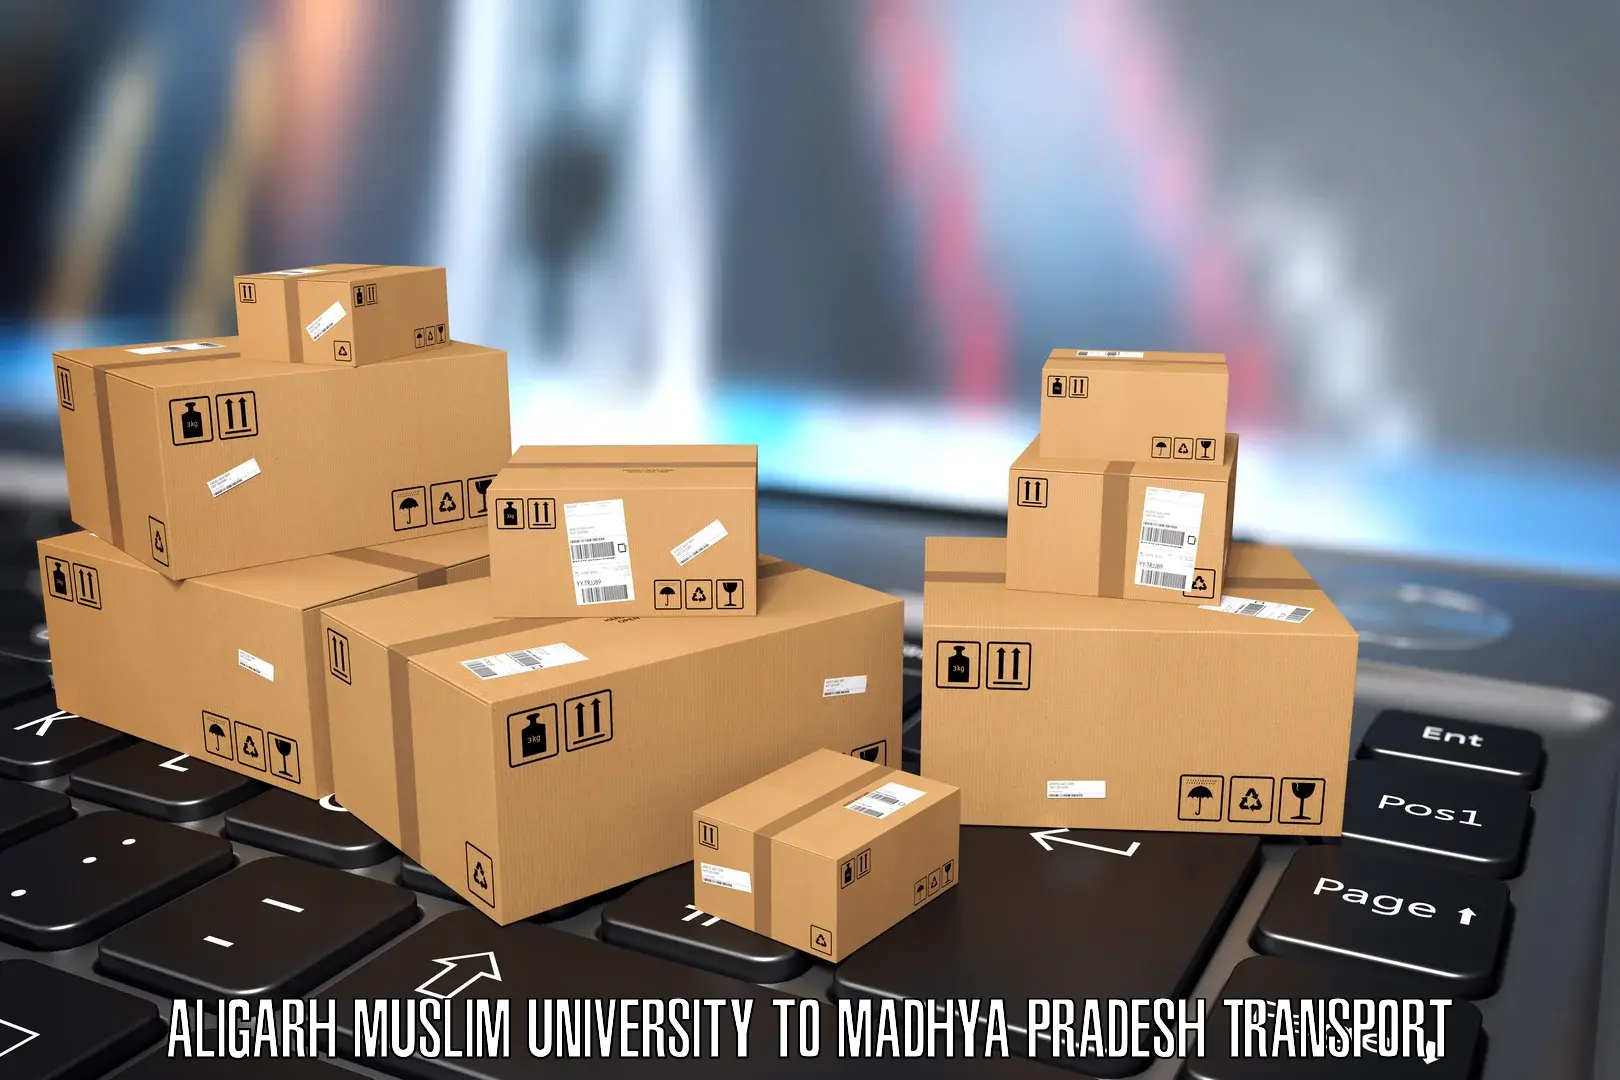 Container transportation services Aligarh Muslim University to Sehore